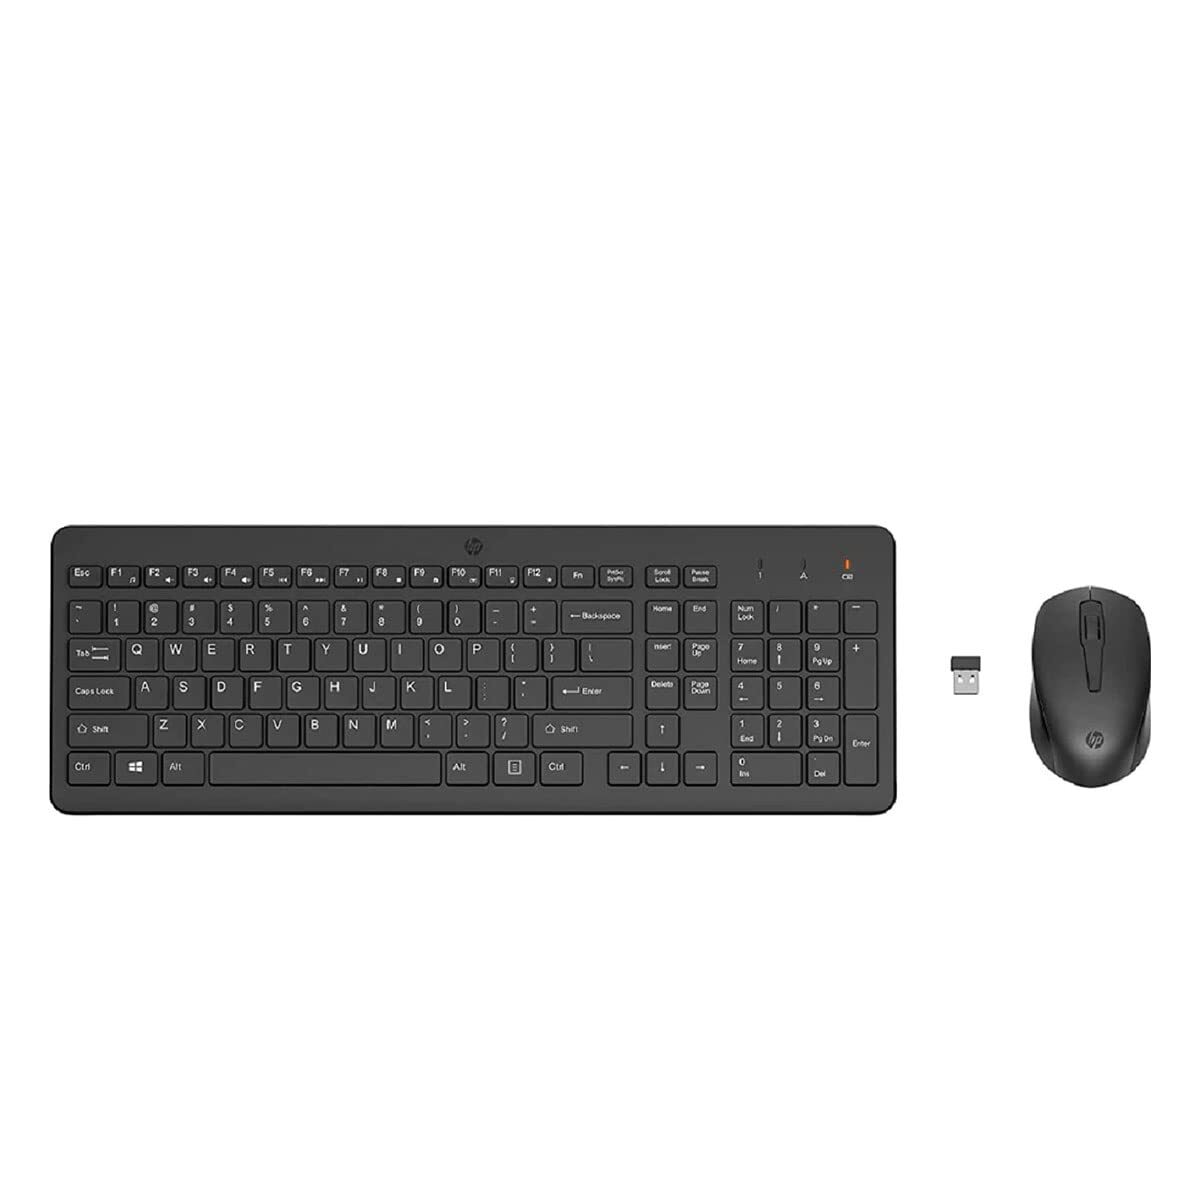 HP 330 Wireless Black Keyboard and Mouse Set with Numeric Keypad, 2.4GHz Wireless Connection and 1600 DPI, USB Receiver, LED Indicators, Black